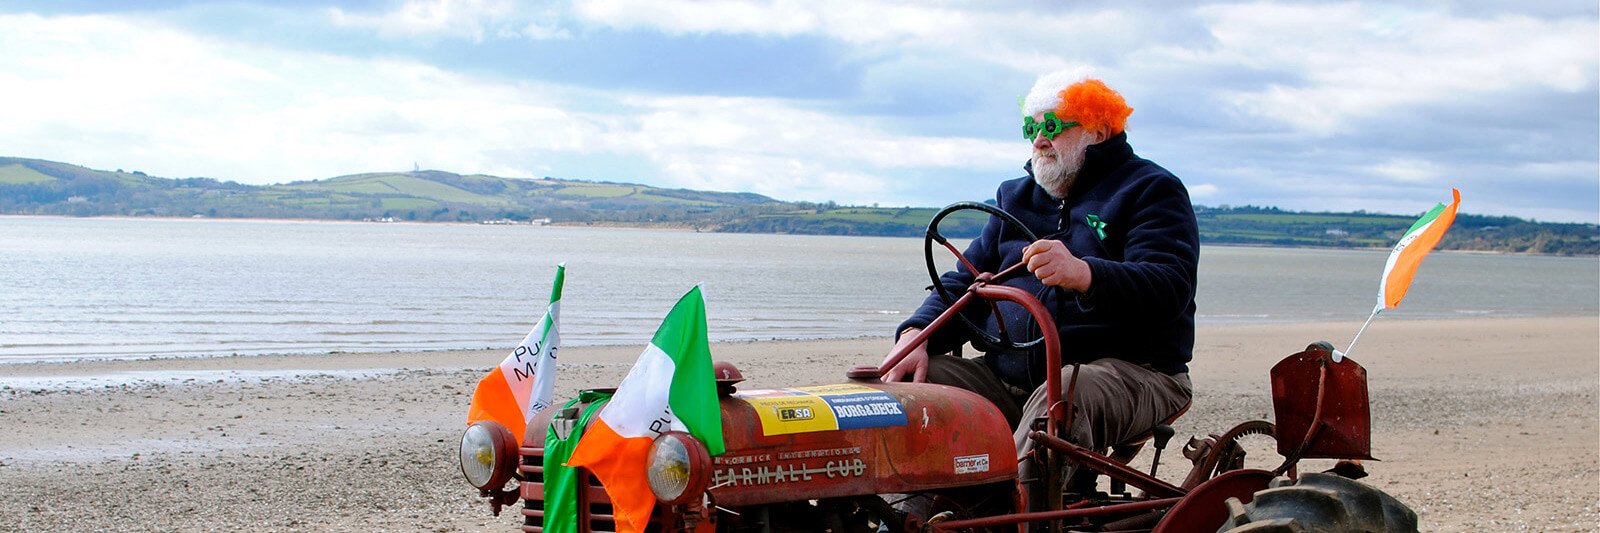 A man driving a tractor covered in Irish flags on a beach with an Irish wig and glasses on